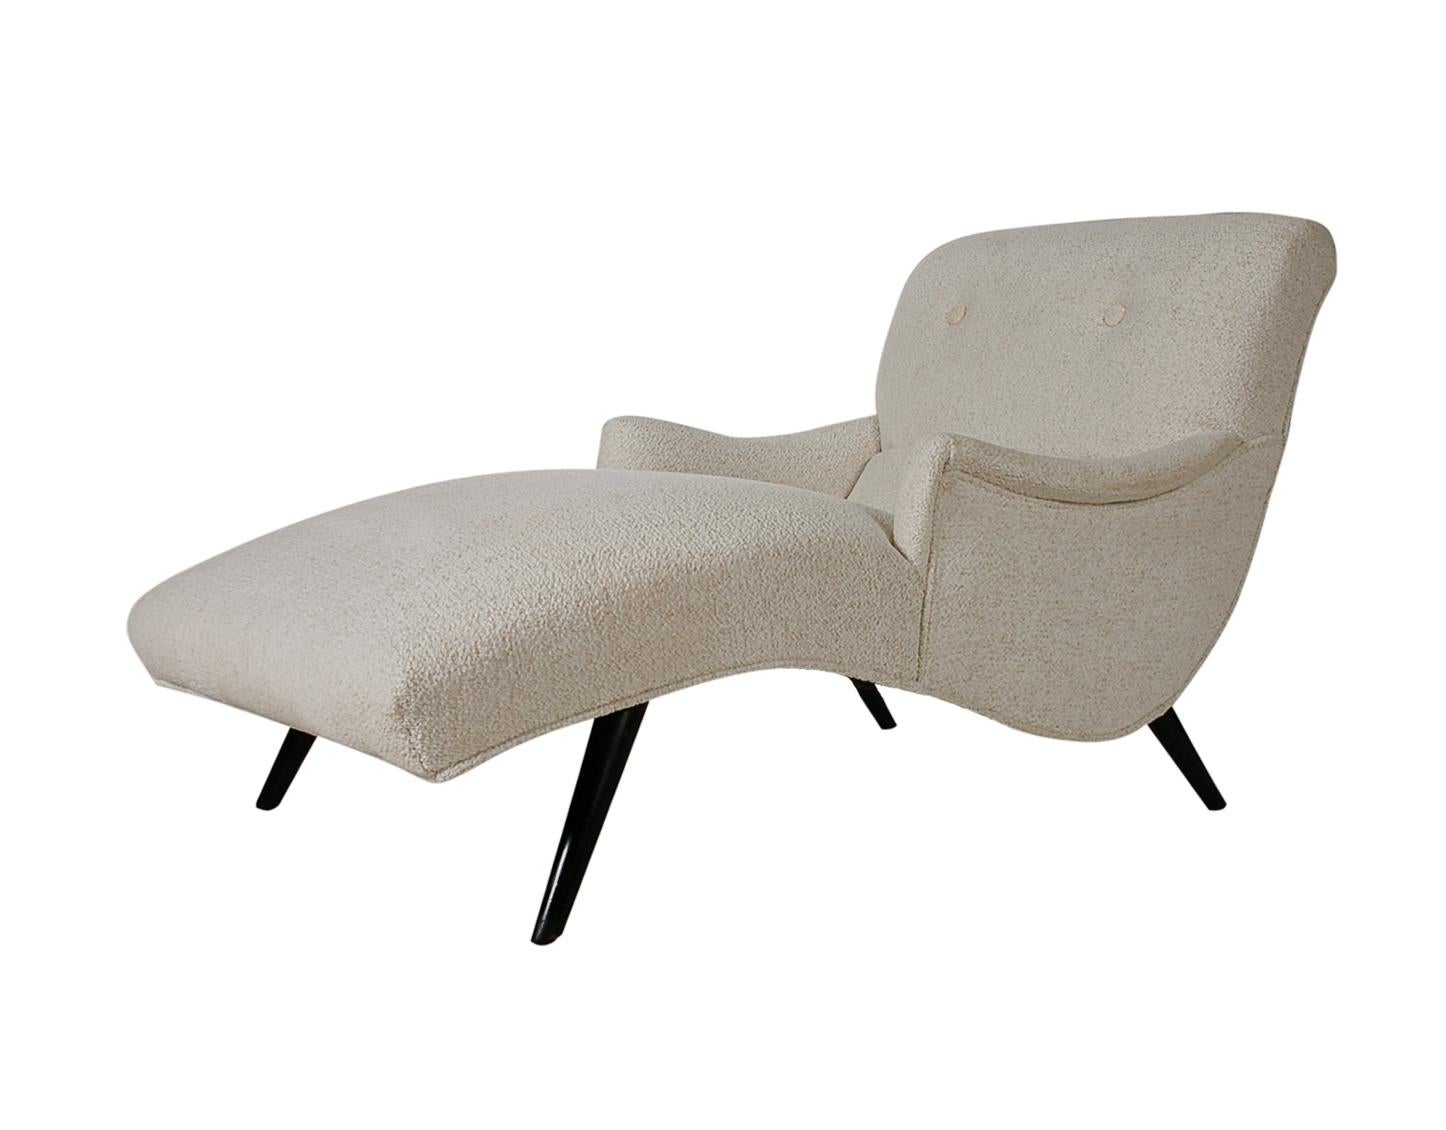 Mid-Century Modern Midcentury Italian Modern Chaise Lounge Chair after Ico Parisi